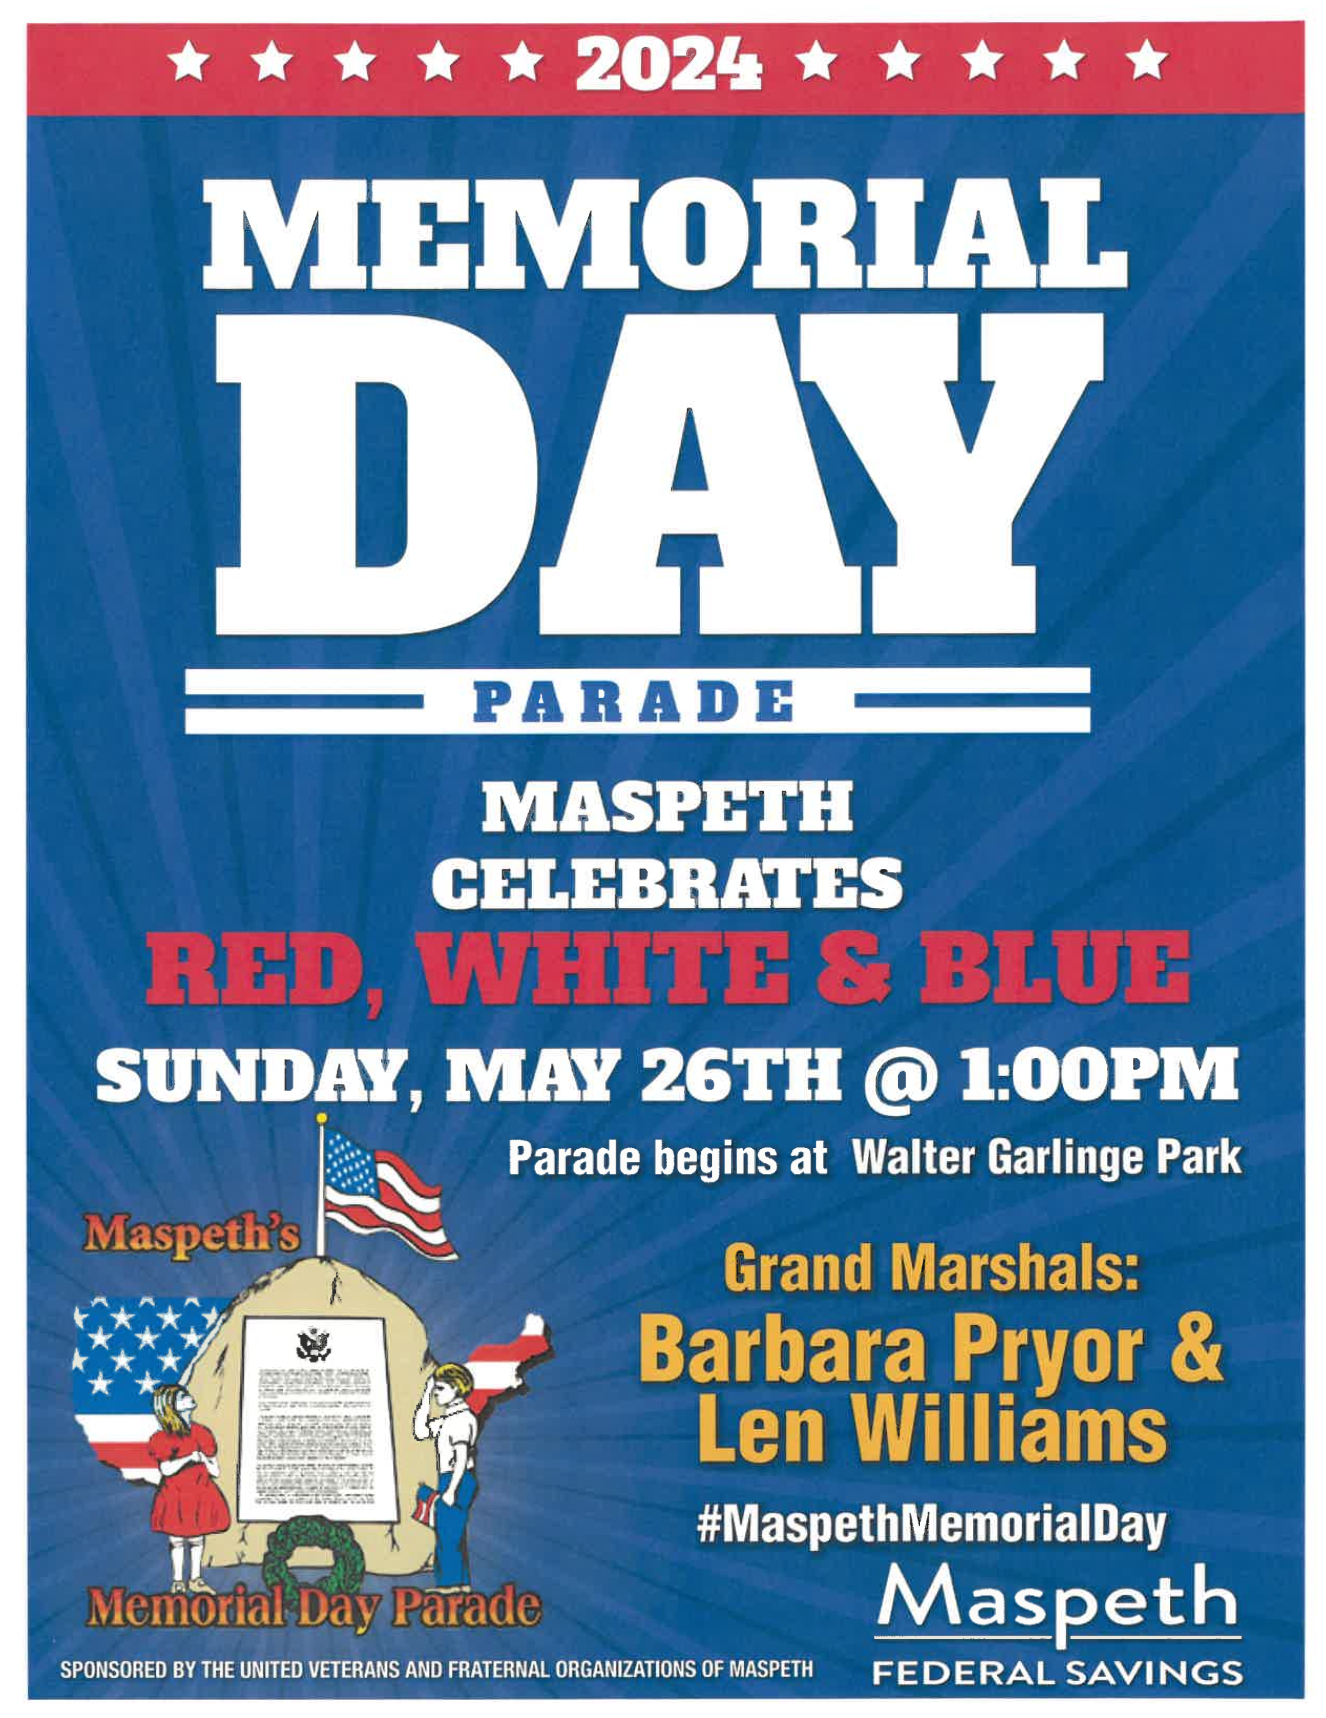 March with us in the Maspeth Memorial Day Parade